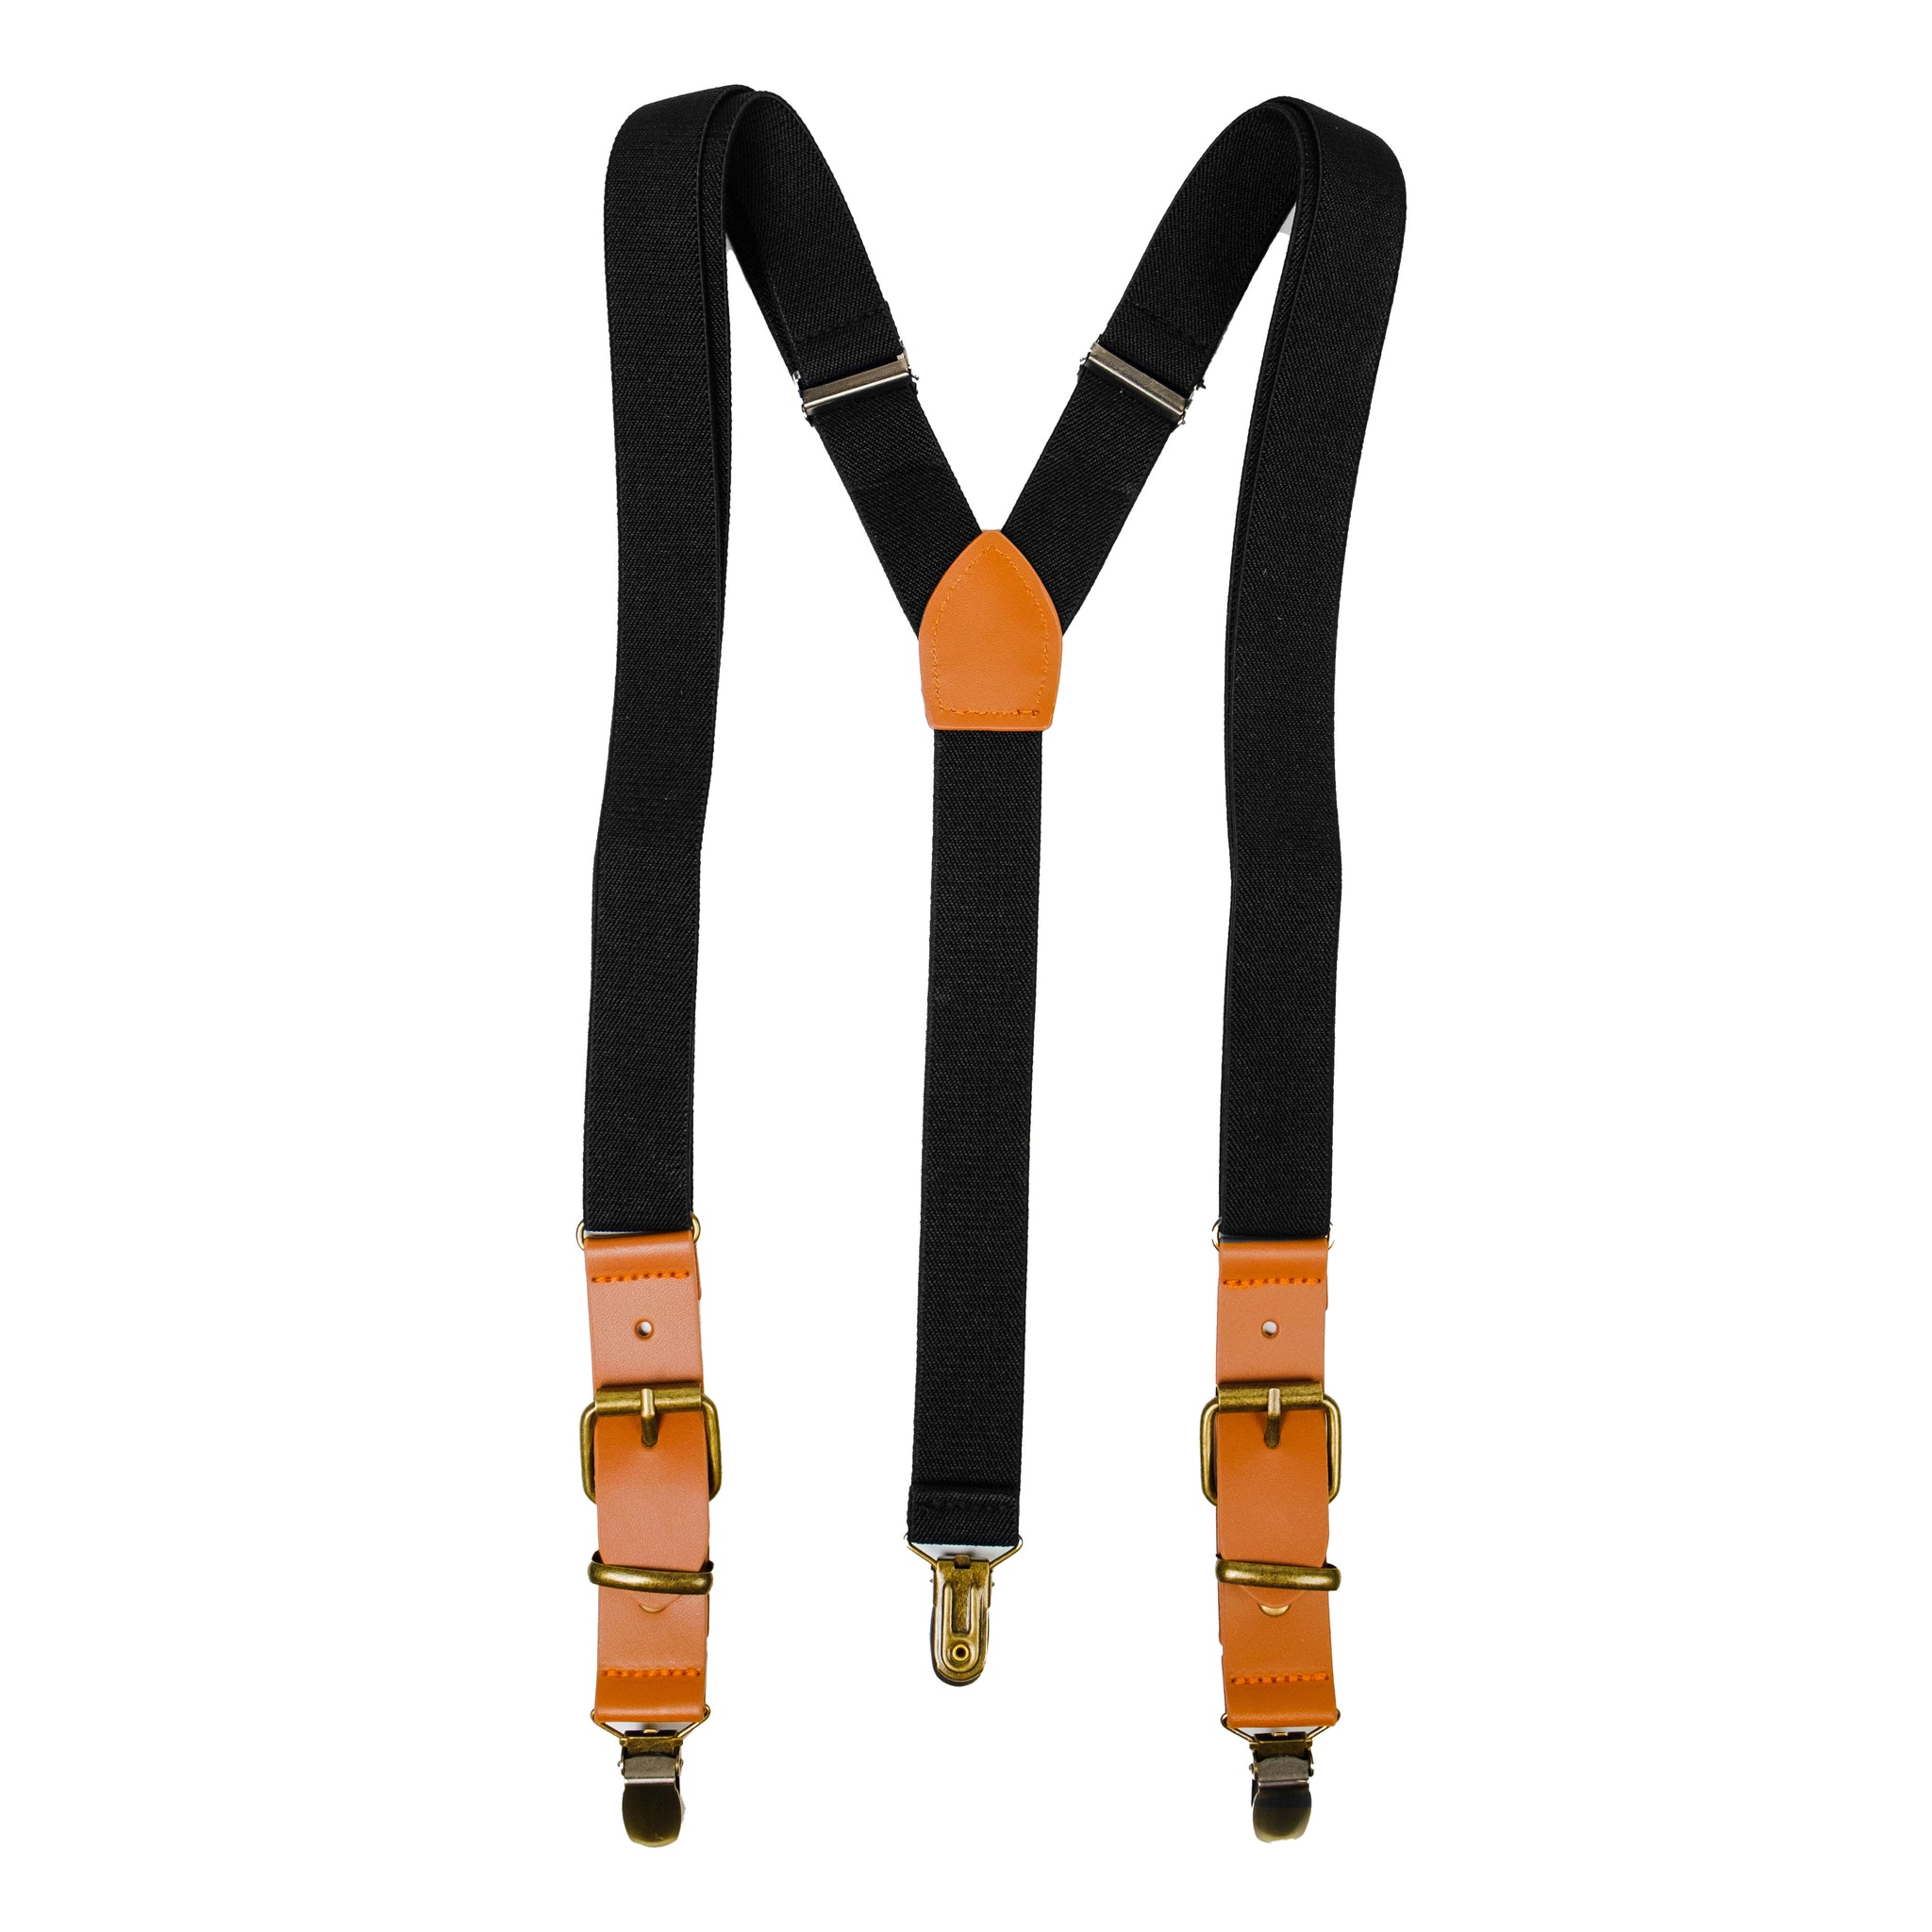 Chokore Y-shaped Suspenders with Leather detailing and adjustable Elastic Strap (Black)